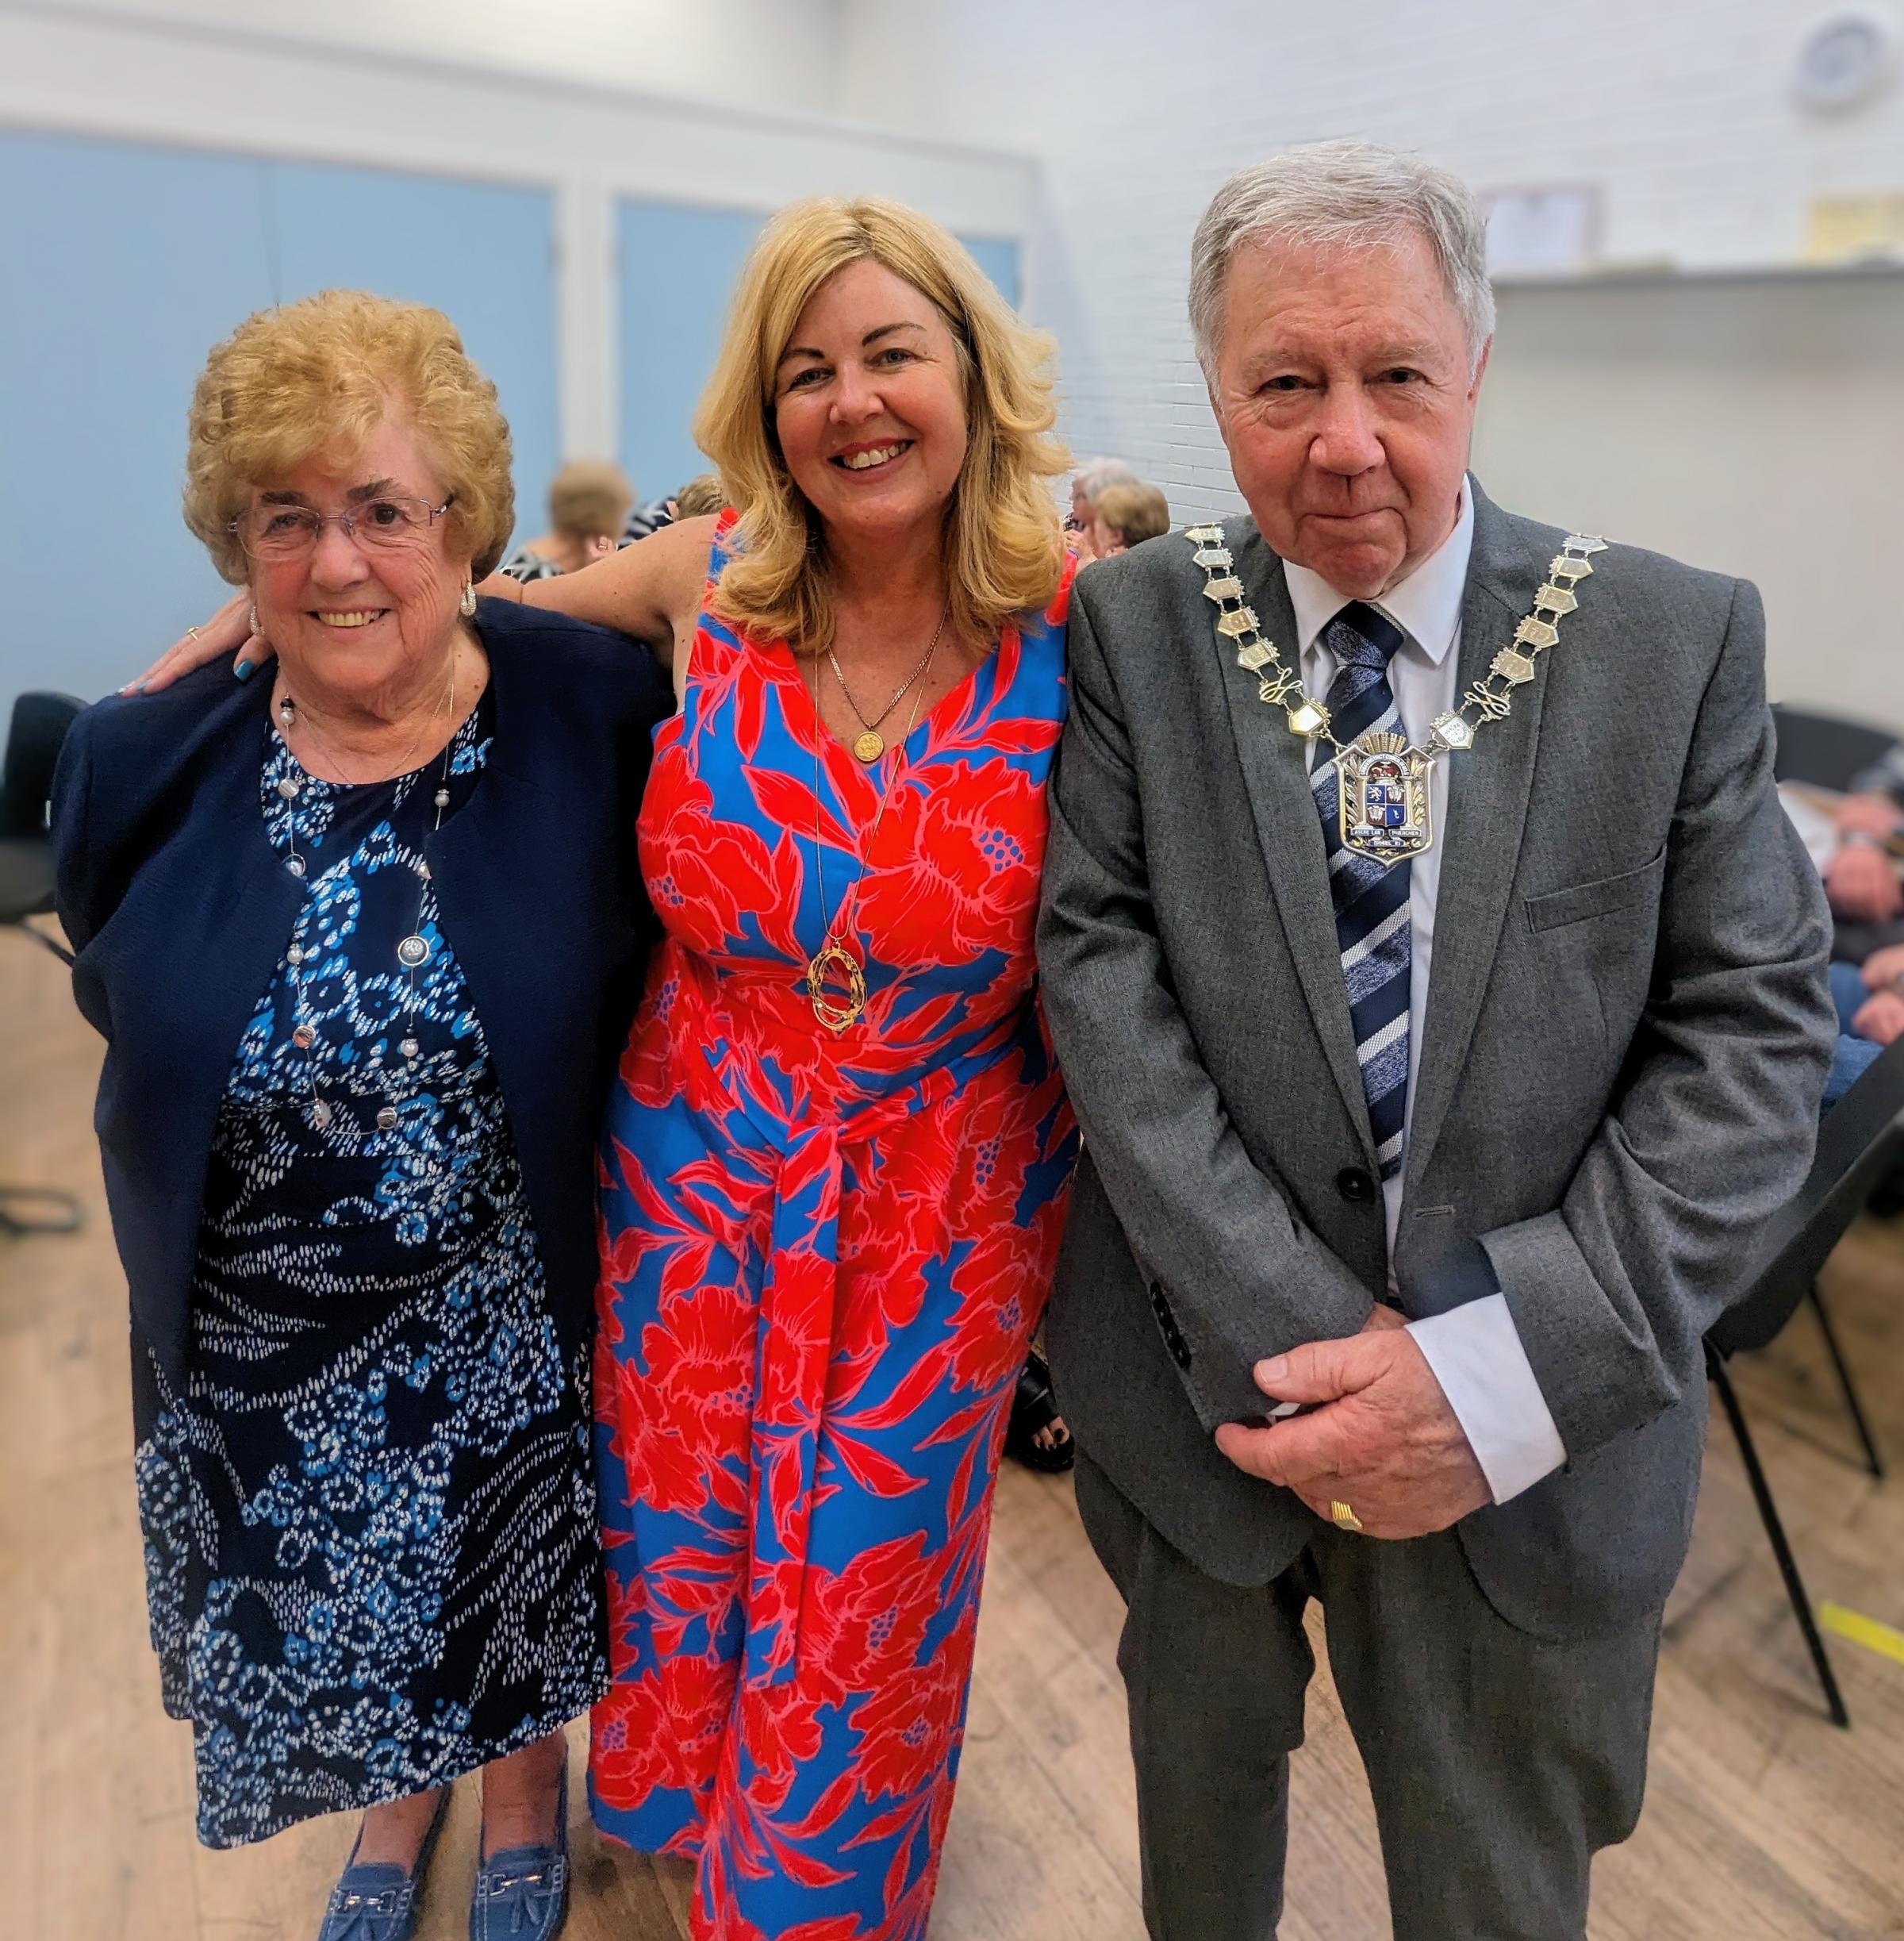 Mayor of Mold Cllr Brian Lloyd with wife Jean and daughter Joanne Jakeman.